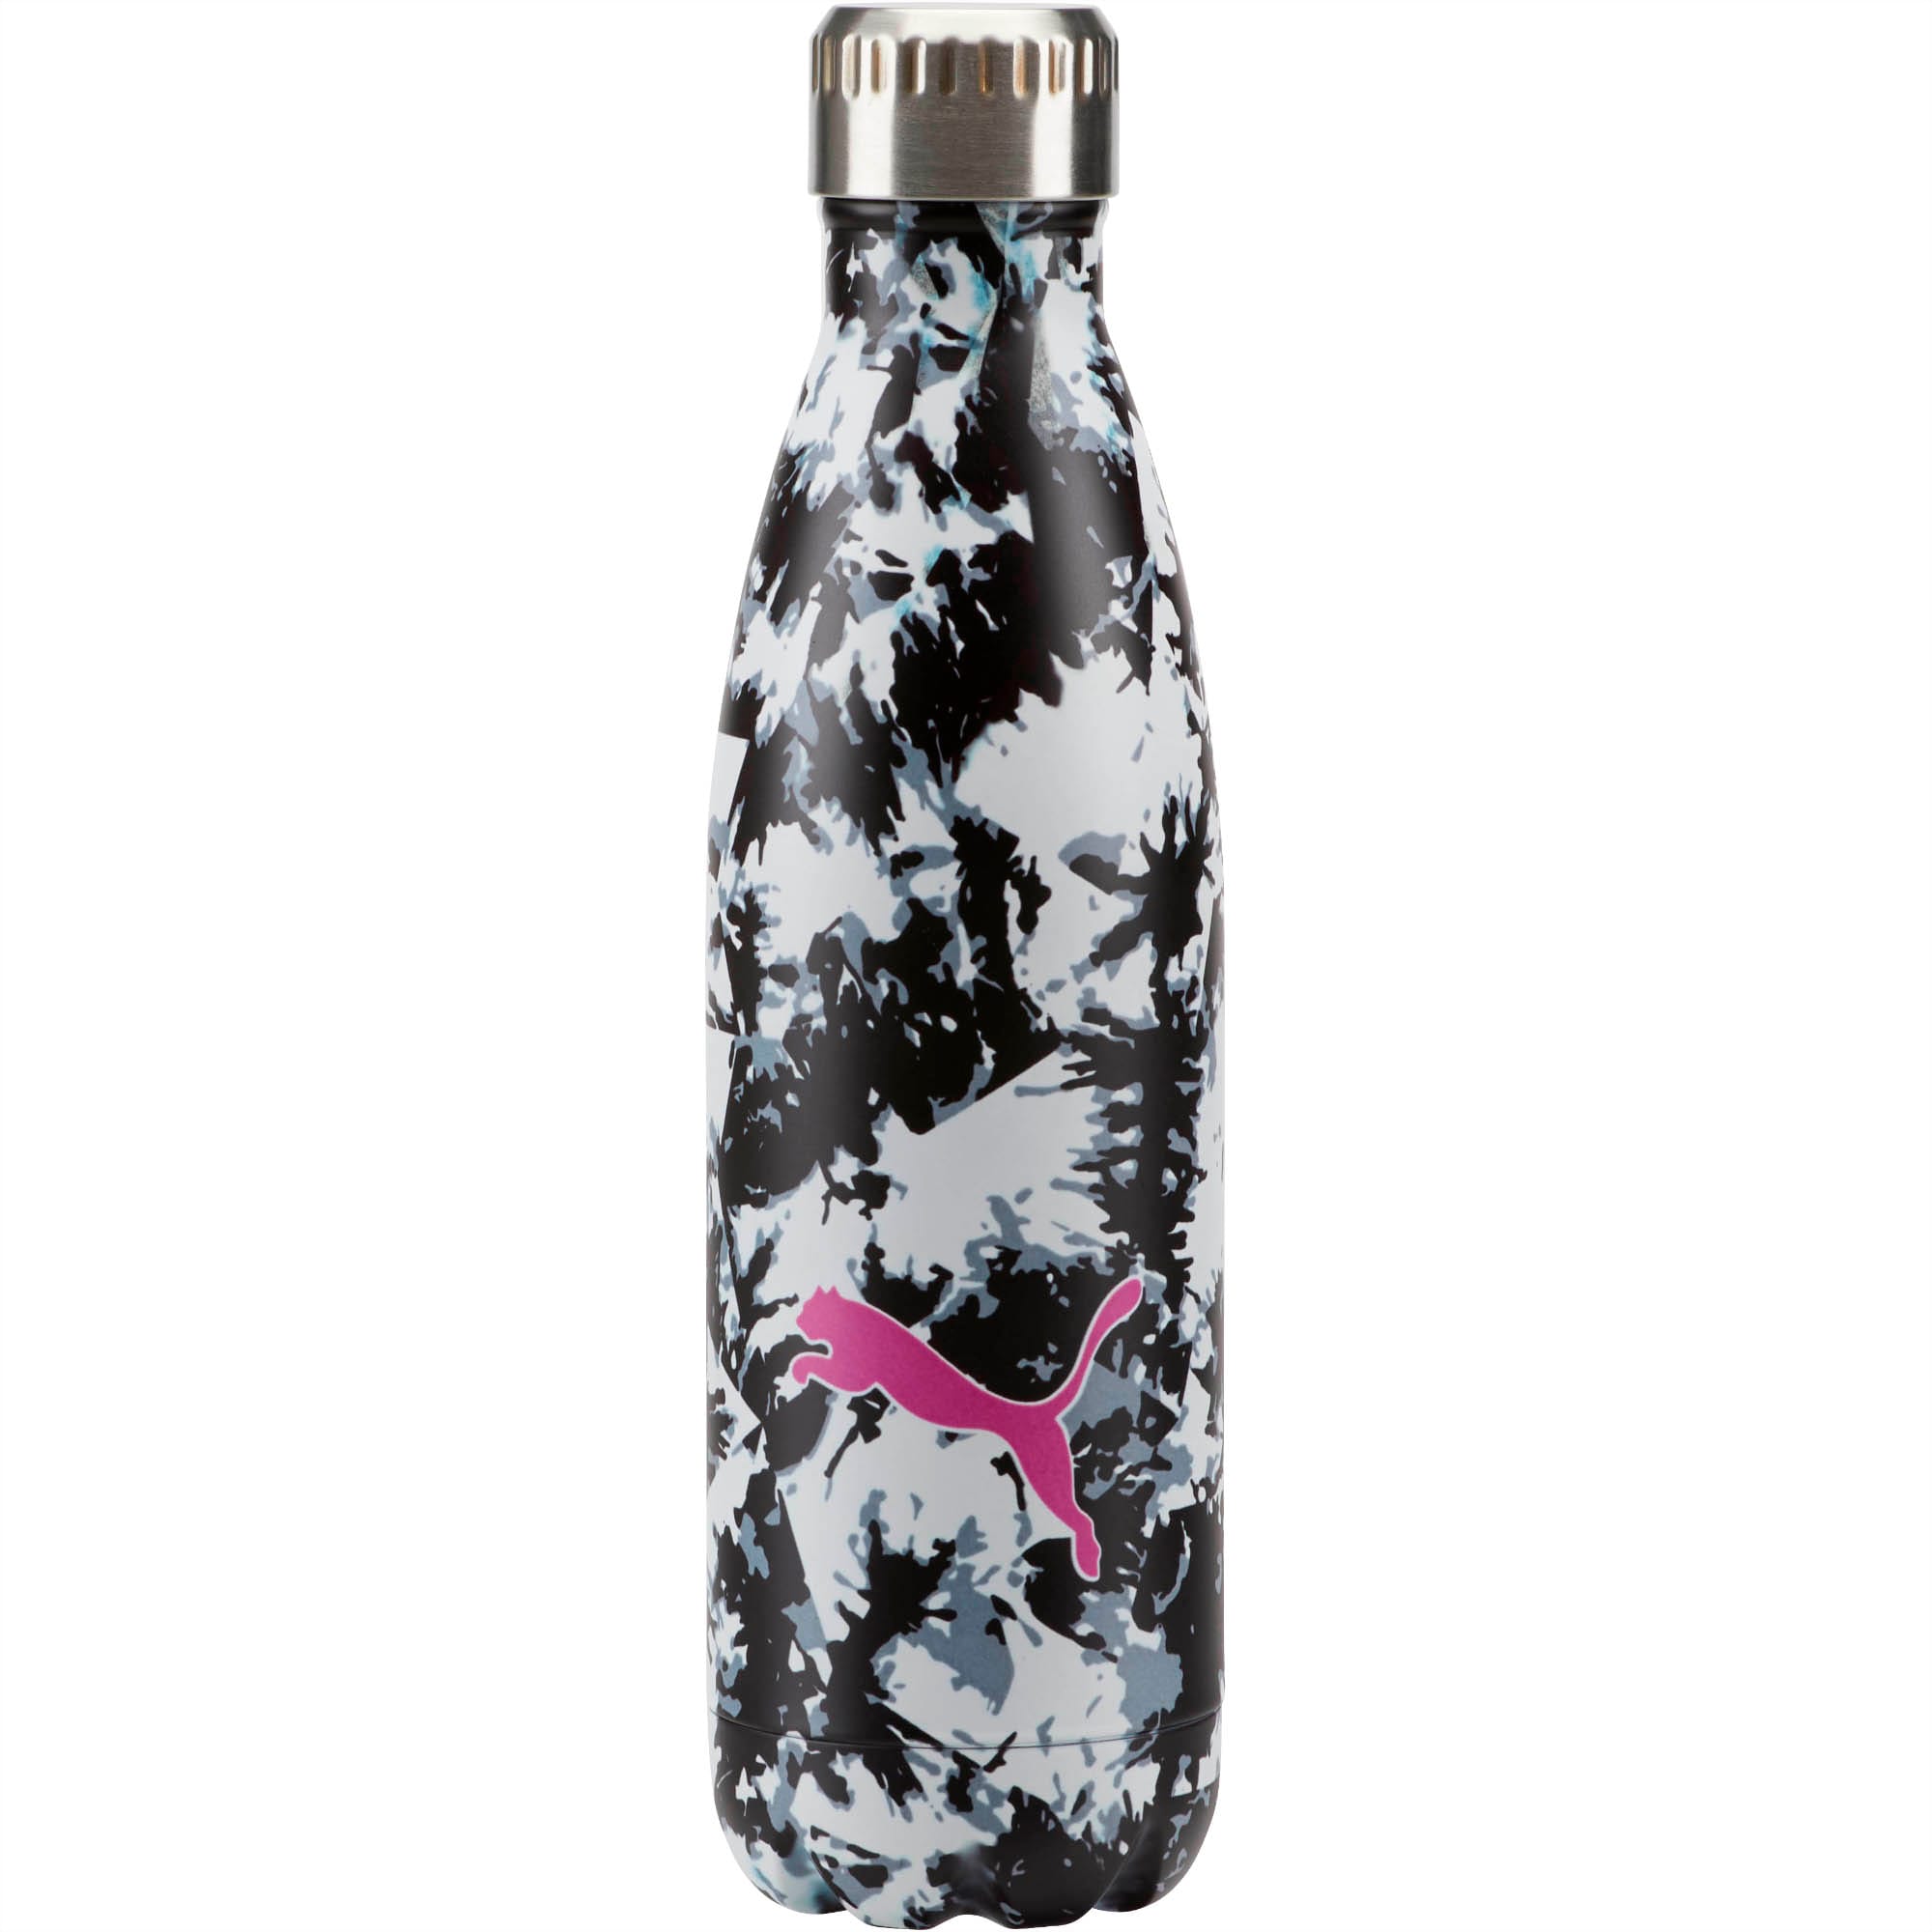 Puma Training Exhale stainless steel water bottle in cream